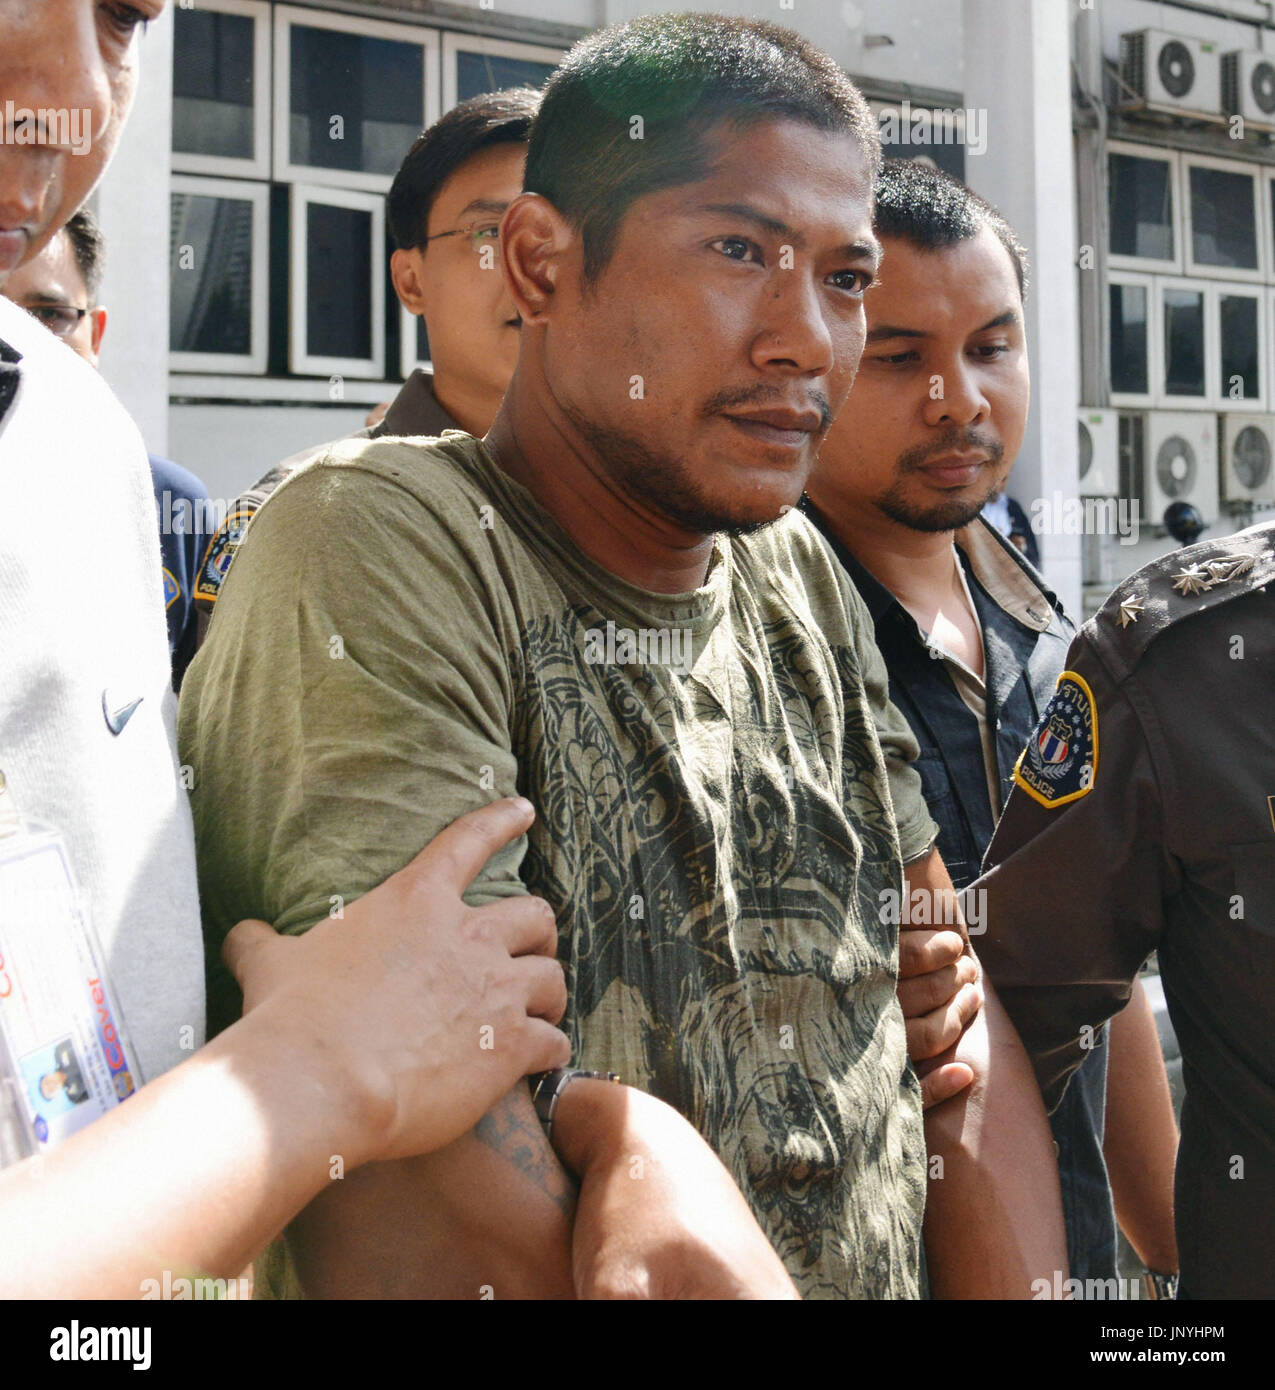 BANGKOK, Thailand - Photo taken in Bangkok on Oct. 8, 2012, shows Wirasak Iamphongsa, who was arrested by police the previous day. Wirasak, a Thai murder suspect who escaped from Japan in 1993, admitted on Oct. 8 to killing a Japanese woman in her Tokyo apartment when he was living there with her. (Kyodo) Stock Photo